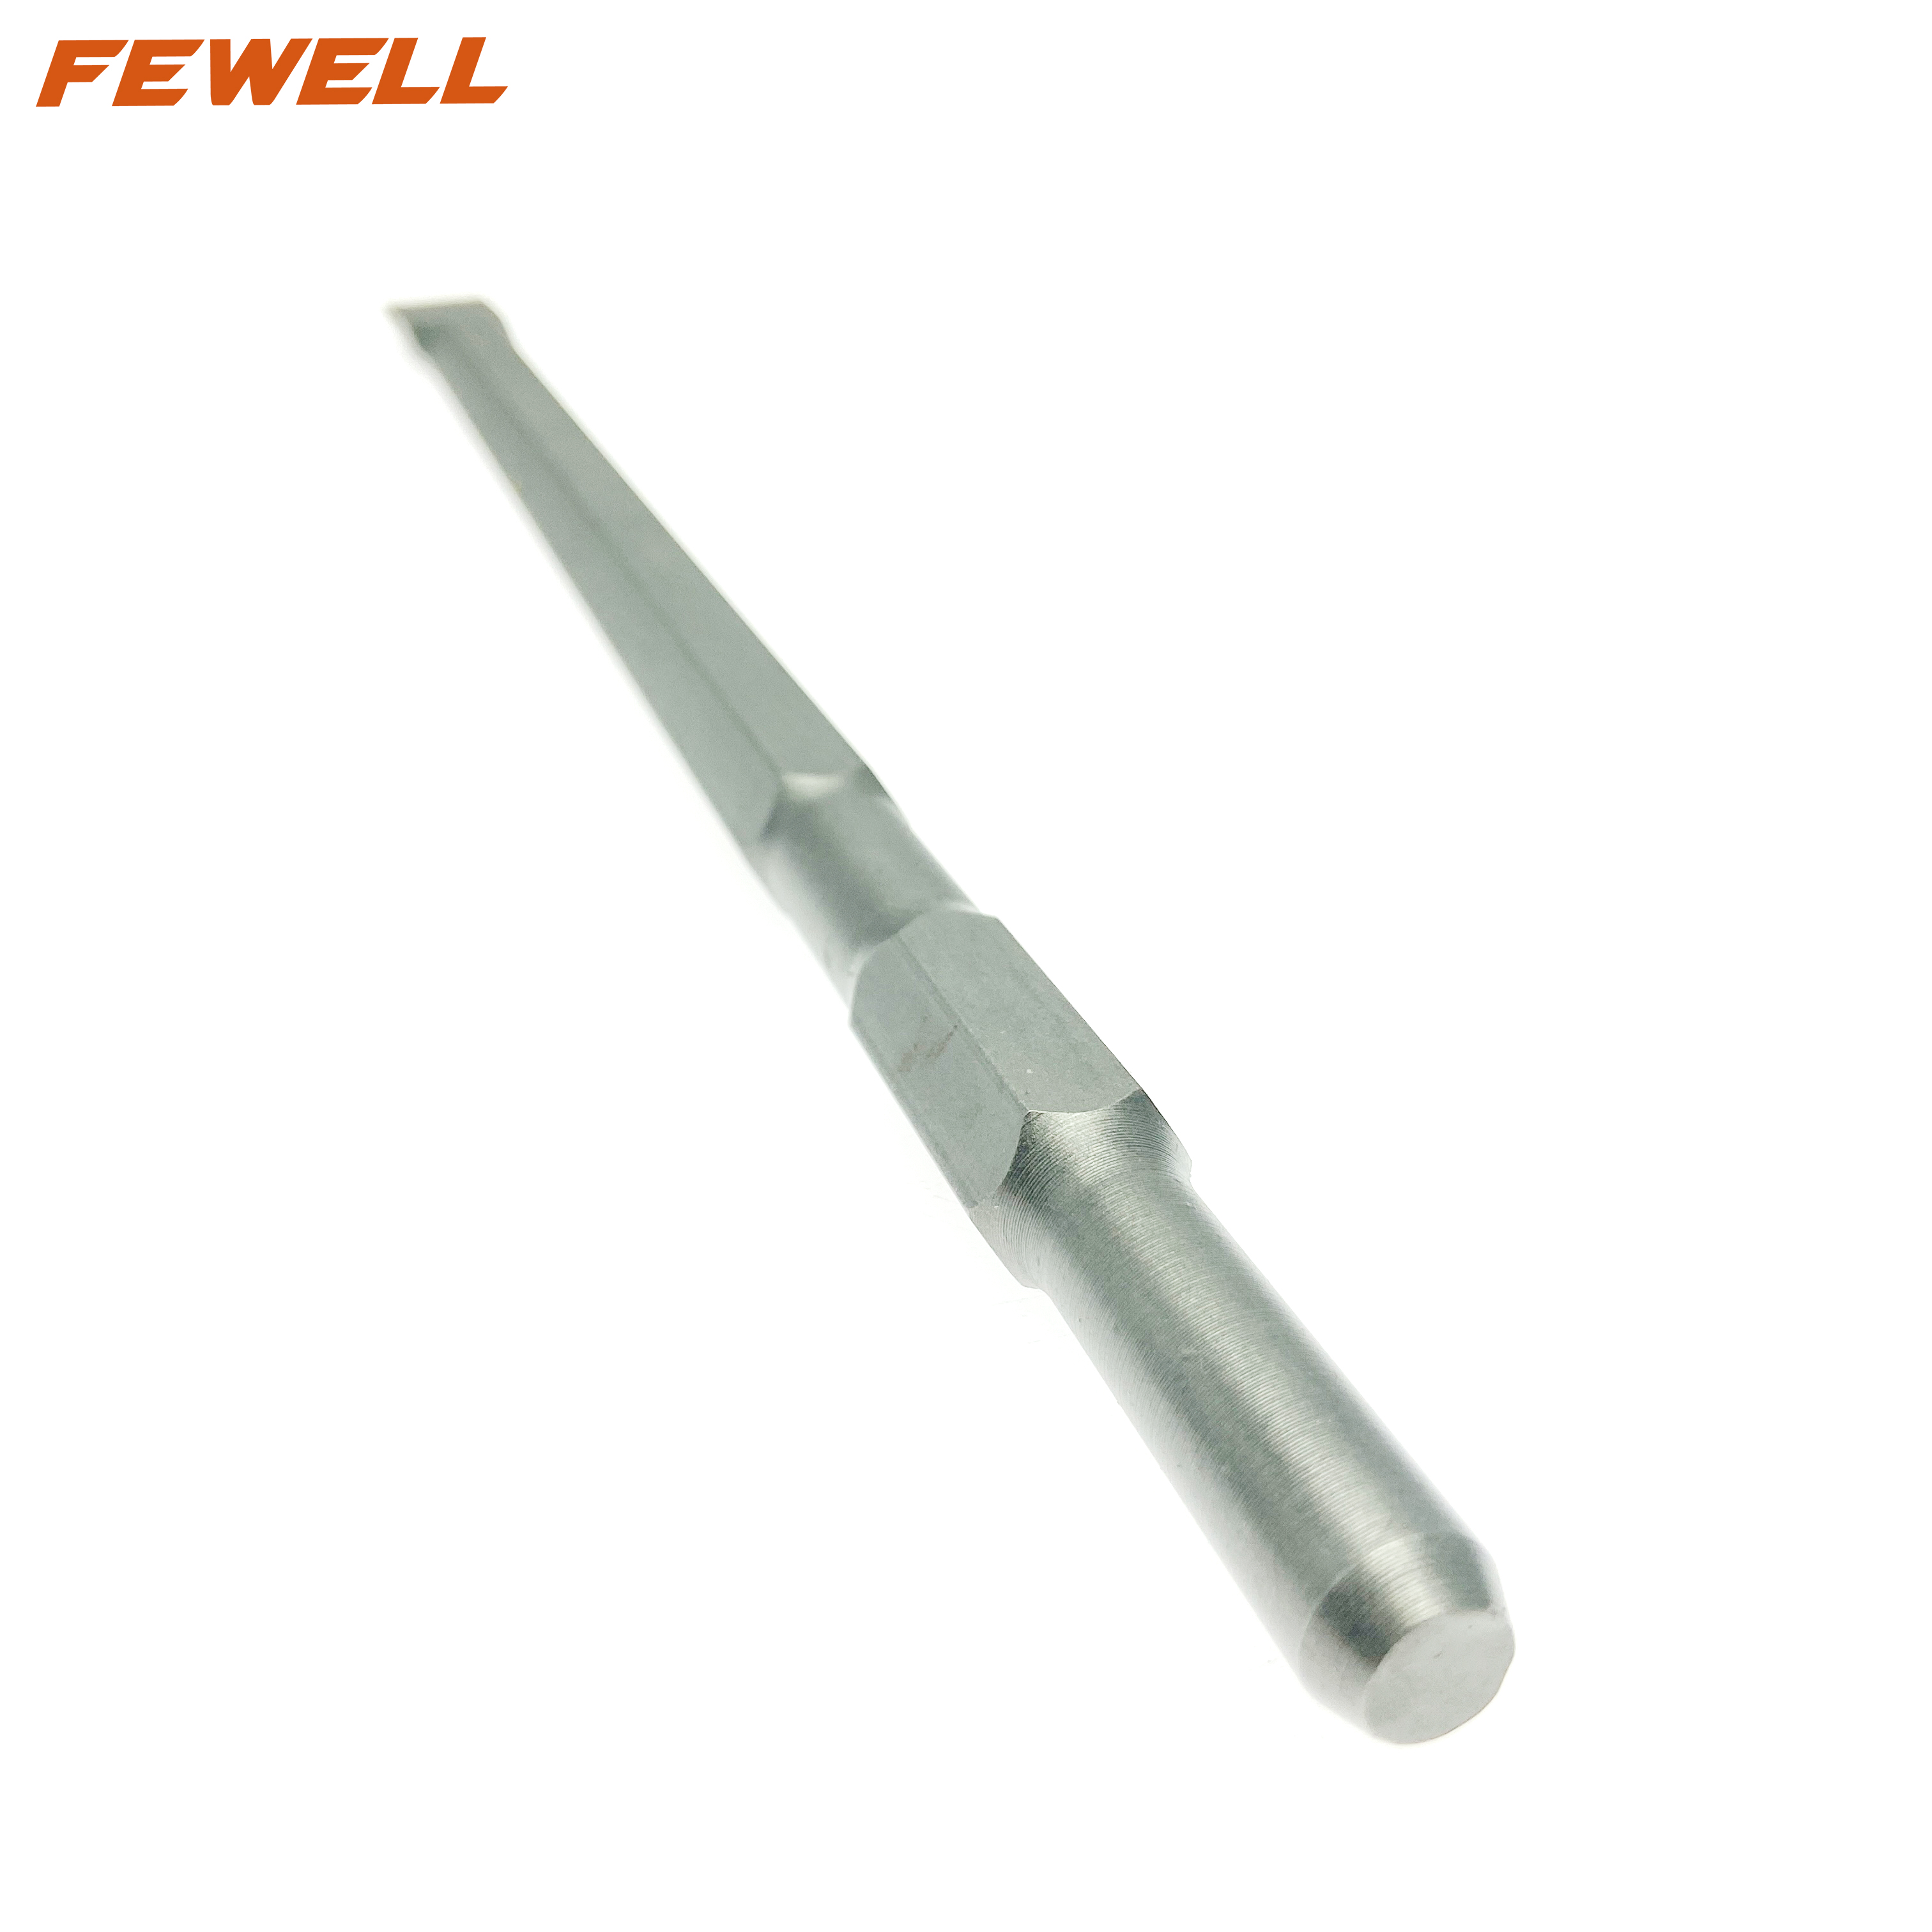 High quality 17x20mm Electric Hammer Drill Bit Hex shank Flat Chisel for tile Masonry Concrete Brick stone